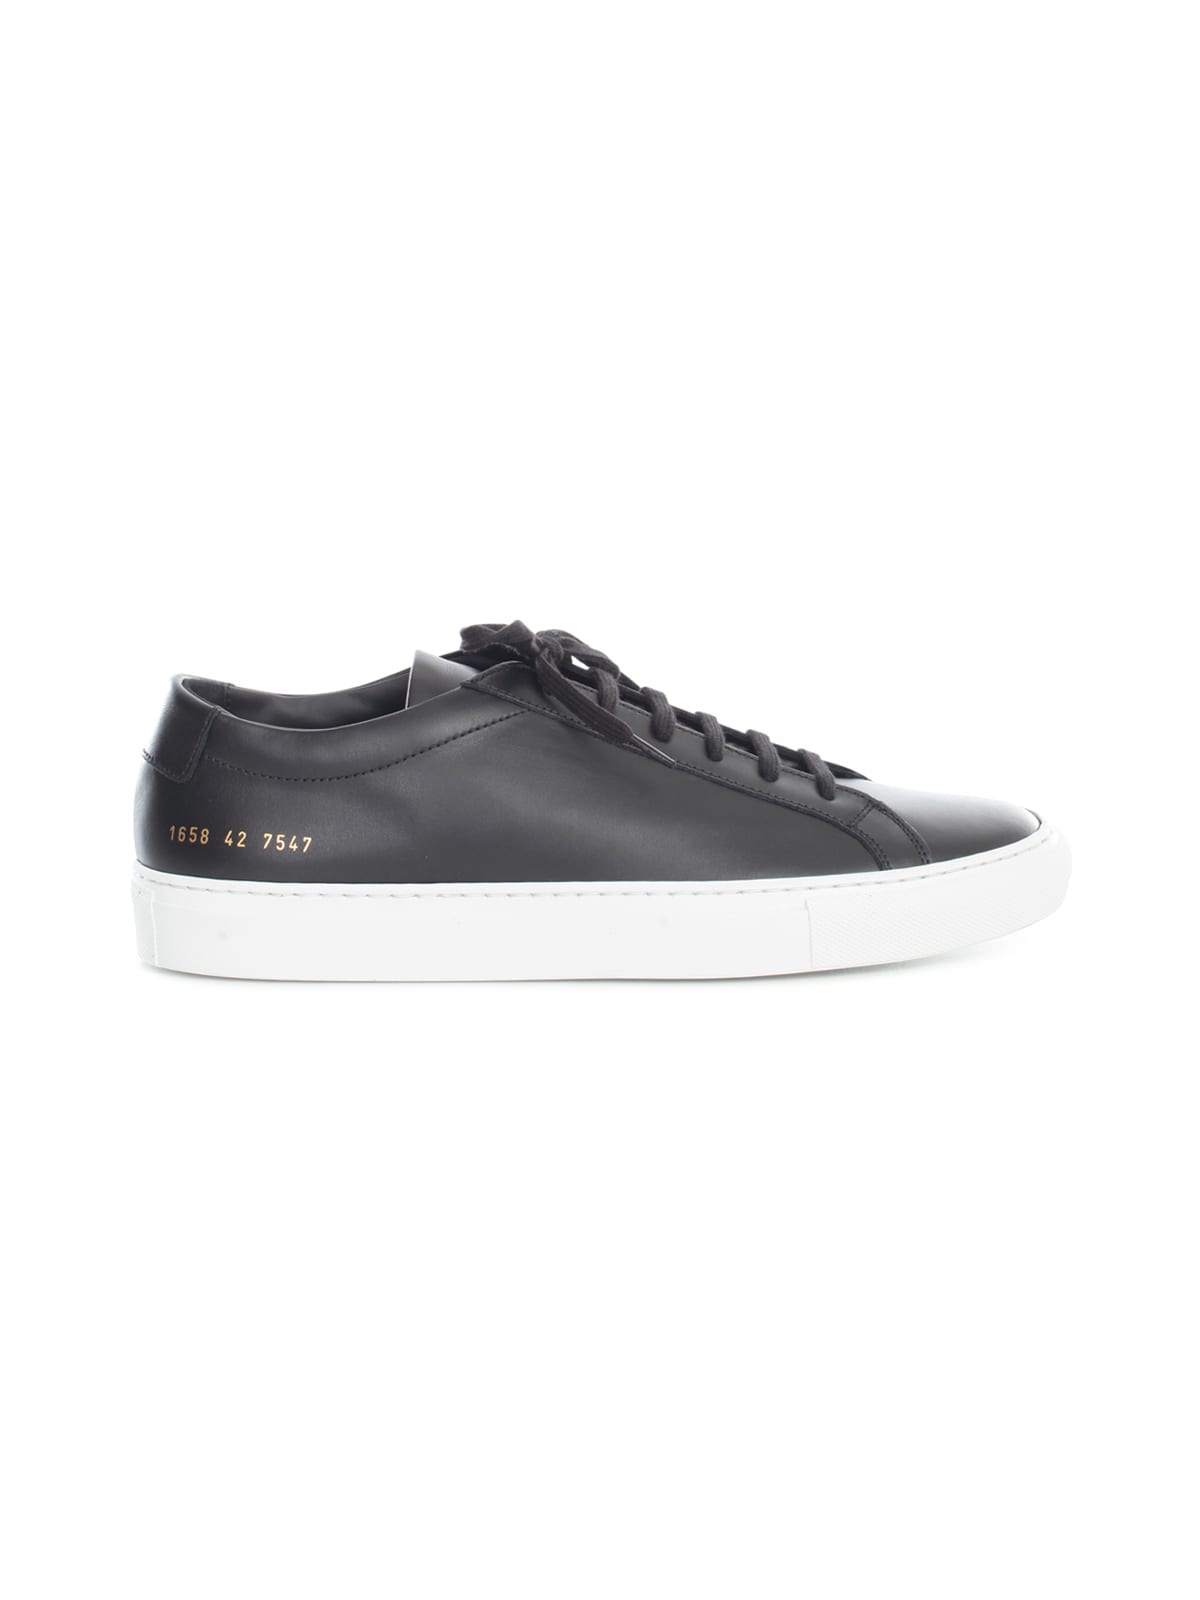 Common Projects Sneaker Nappa Leather Upper Tonal Cotton Laces And Stitch Reinforced White Sole Gold Foil Article Stamp At Heel Counter